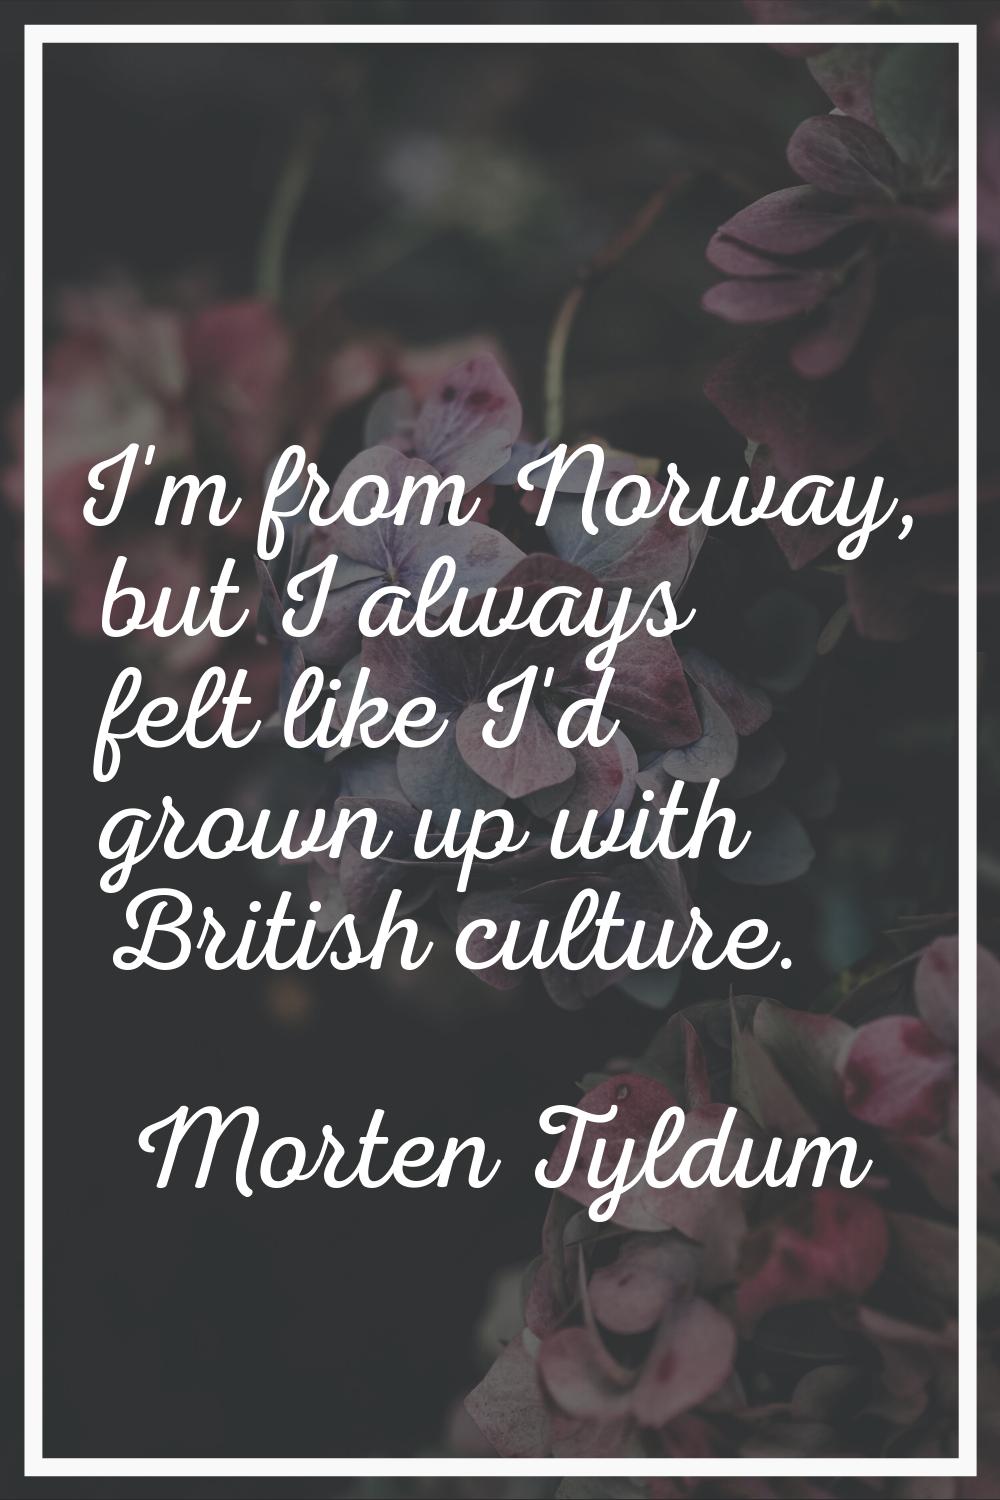 I'm from Norway, but I always felt like I'd grown up with British culture.